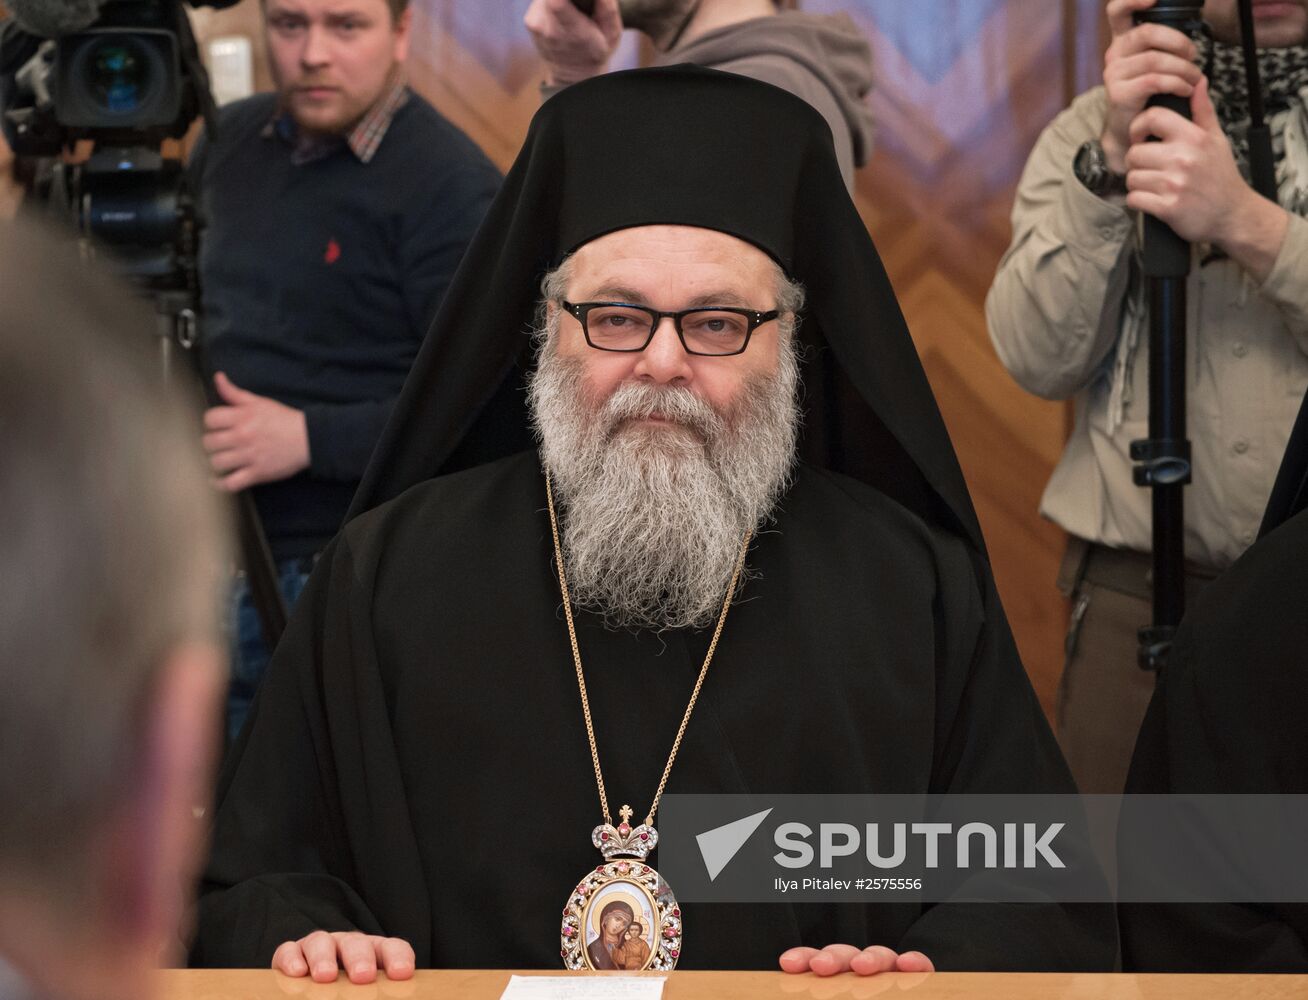 Foreign Minister Sergei Lavrov meets with Patriarch John X of Antioch and All the East